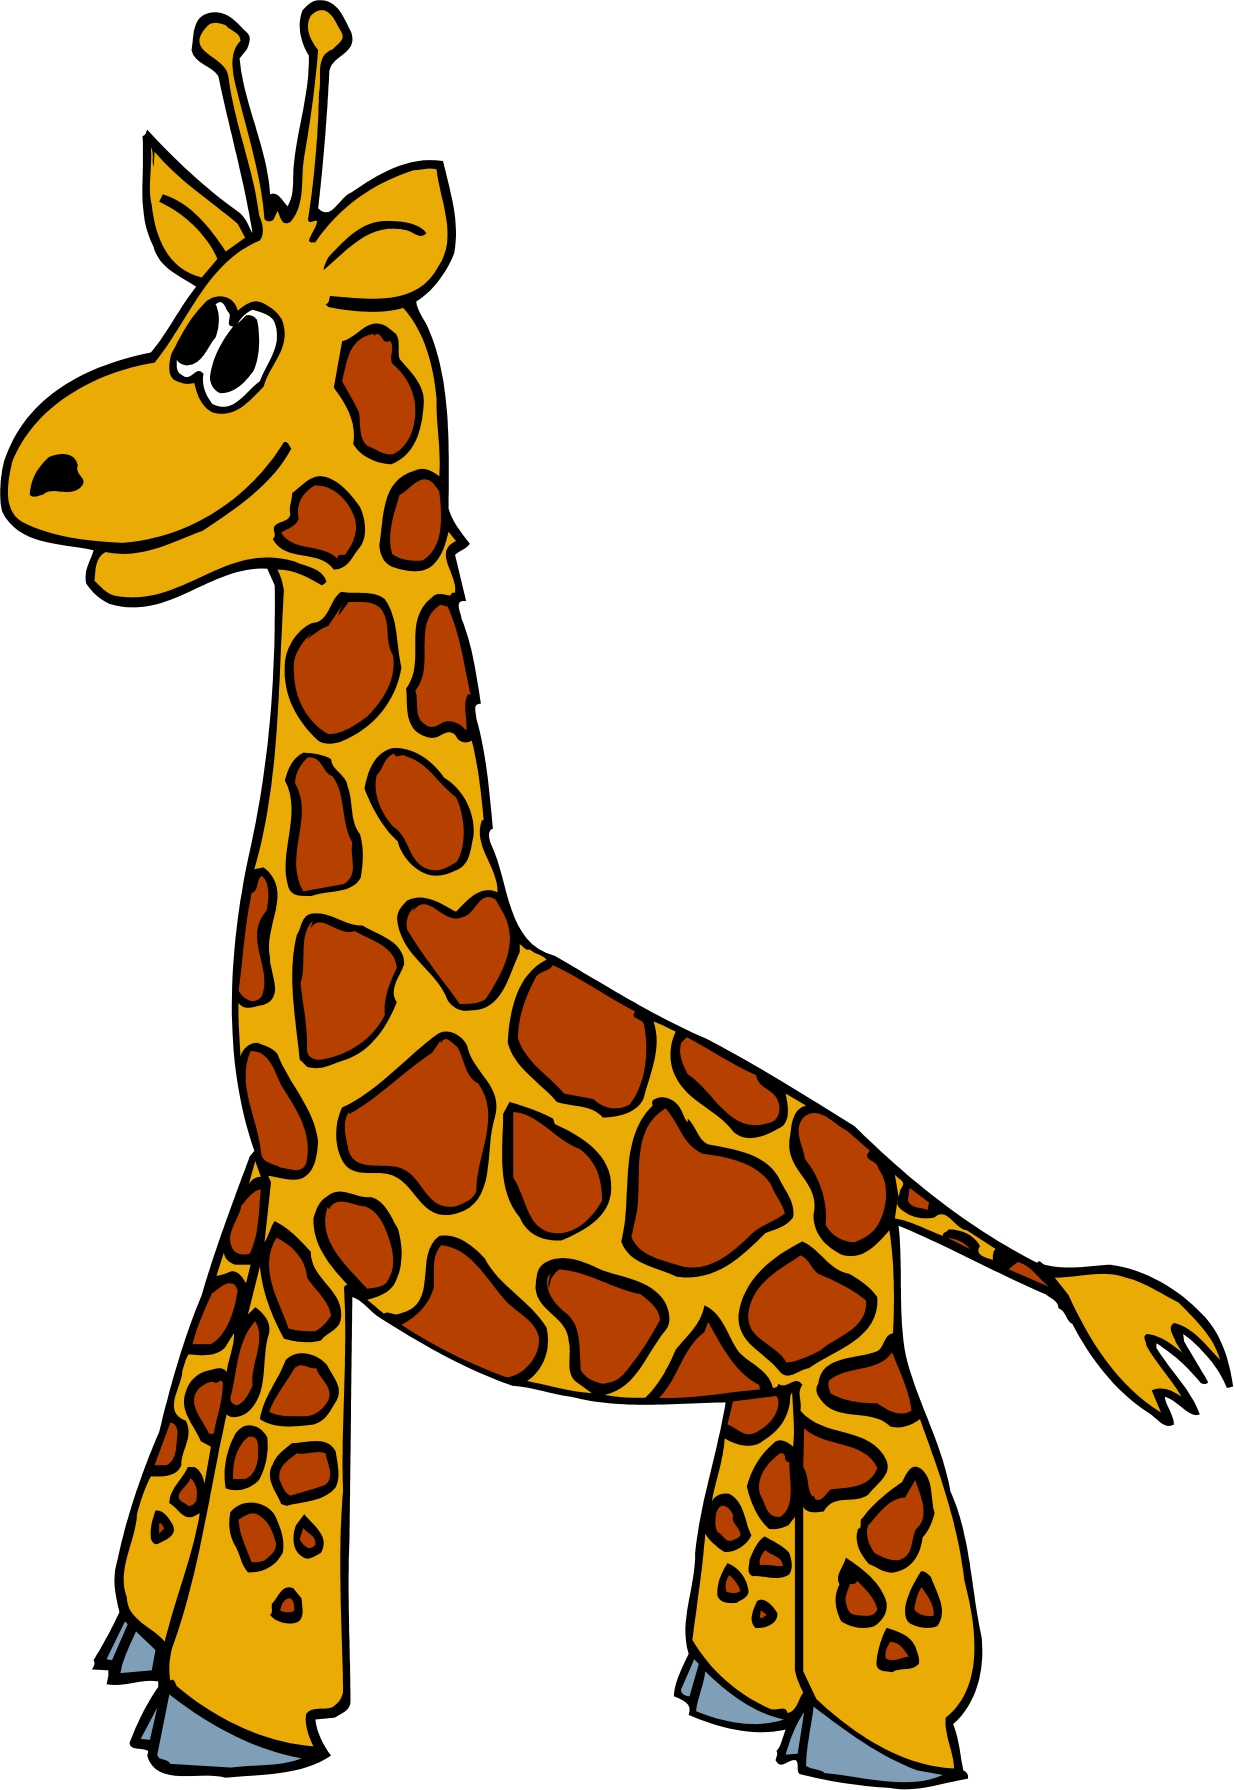 Giraffe Clipart Images - Cliparts.co